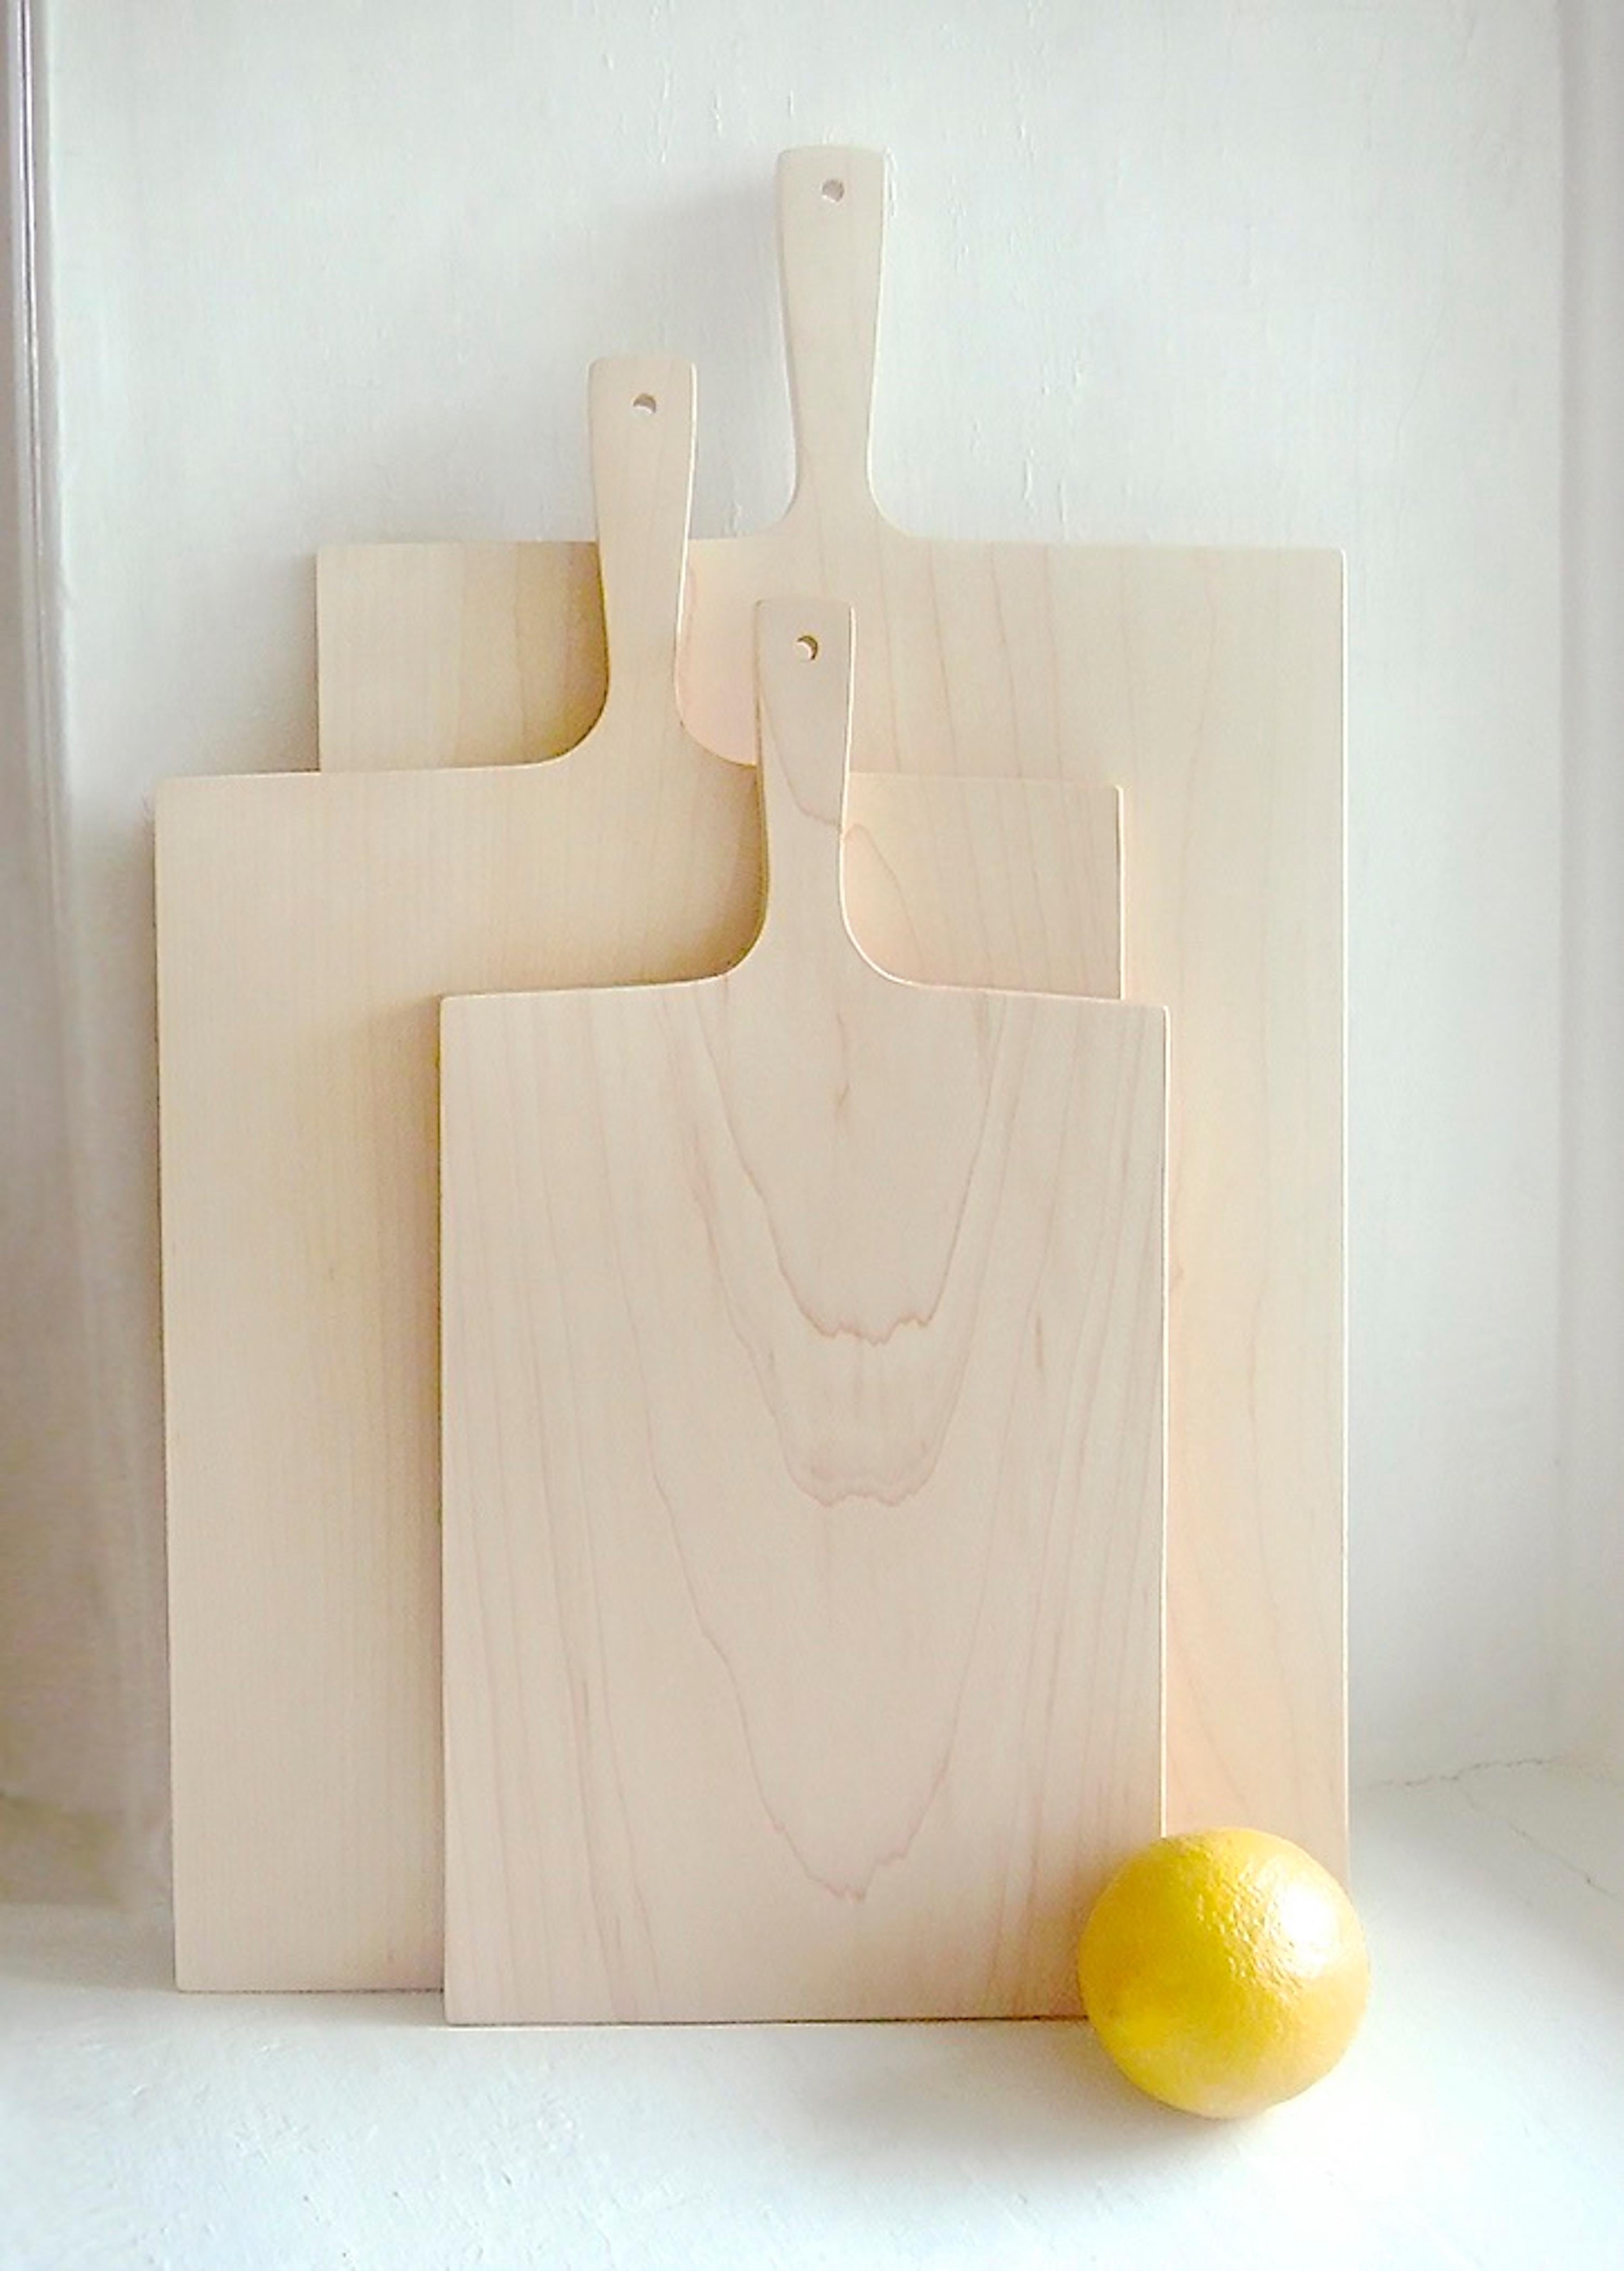 Designed by Deborah Ehrlich and made in Rhode Island by the same master craftsman who makes her chairs - the simplicity and elegance of this maple cutting board speaks to the collector of Deborah Ehrlich's crystal glassware and furniture. 

It's